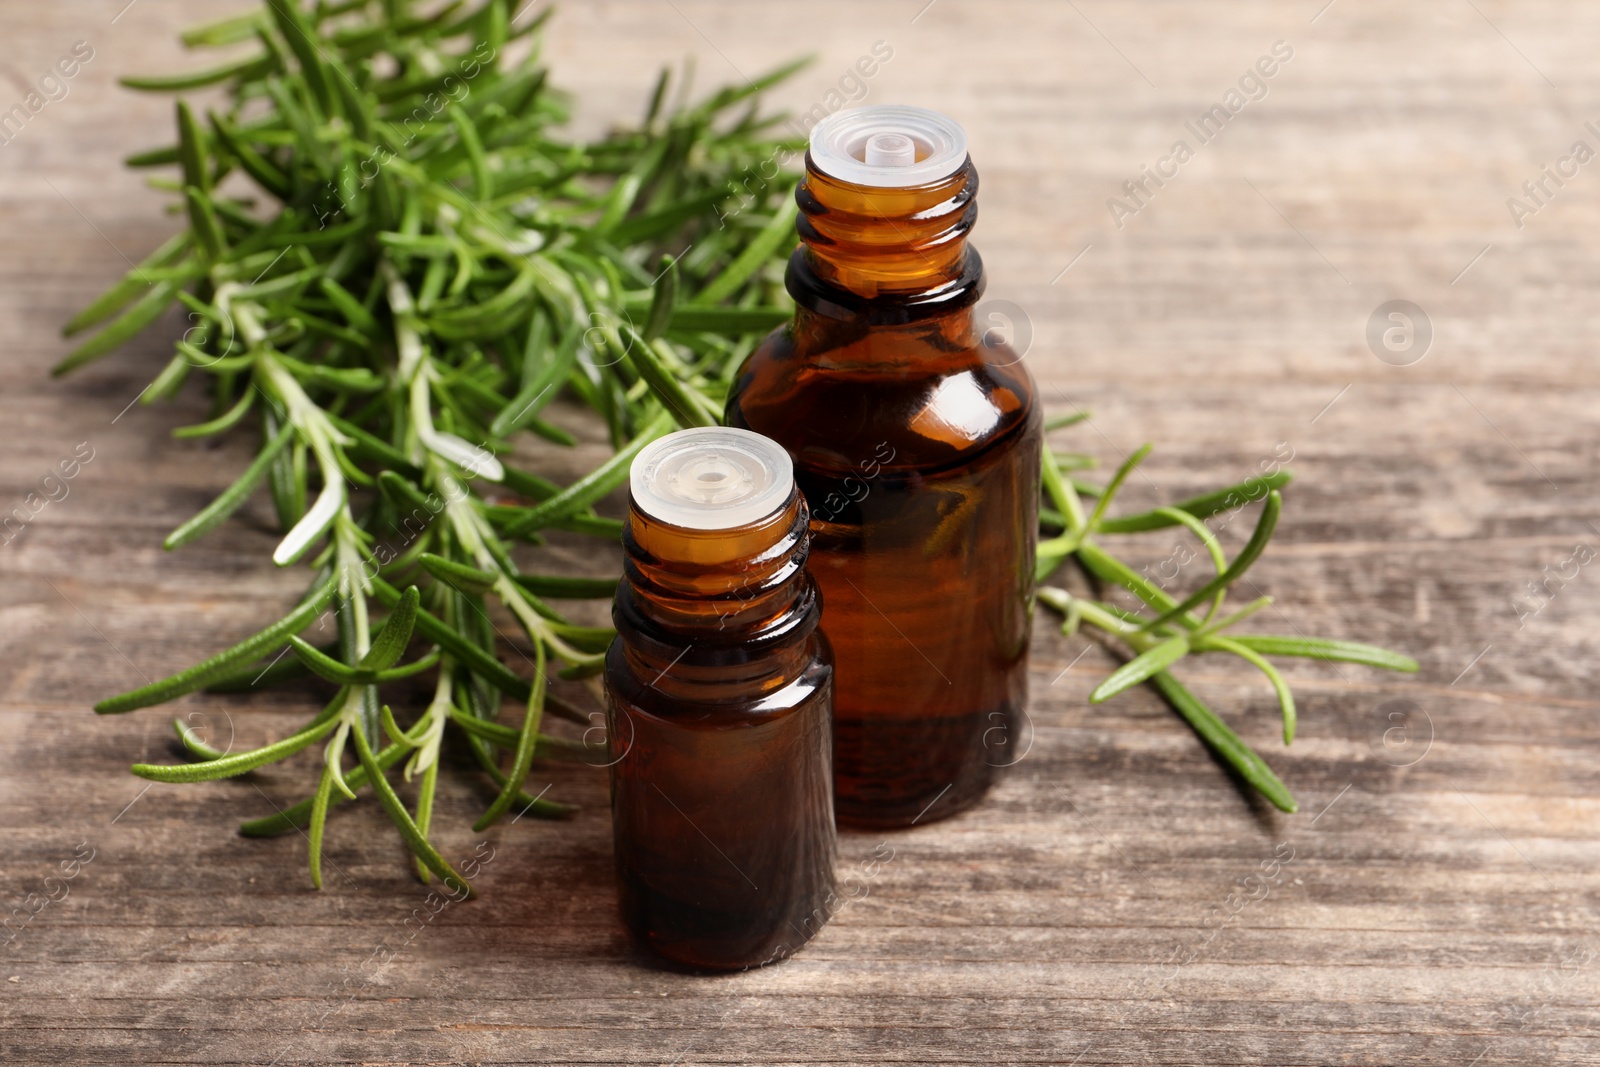 Photo of Bottles of essential oil and fresh rosemary sprigs on wooden table